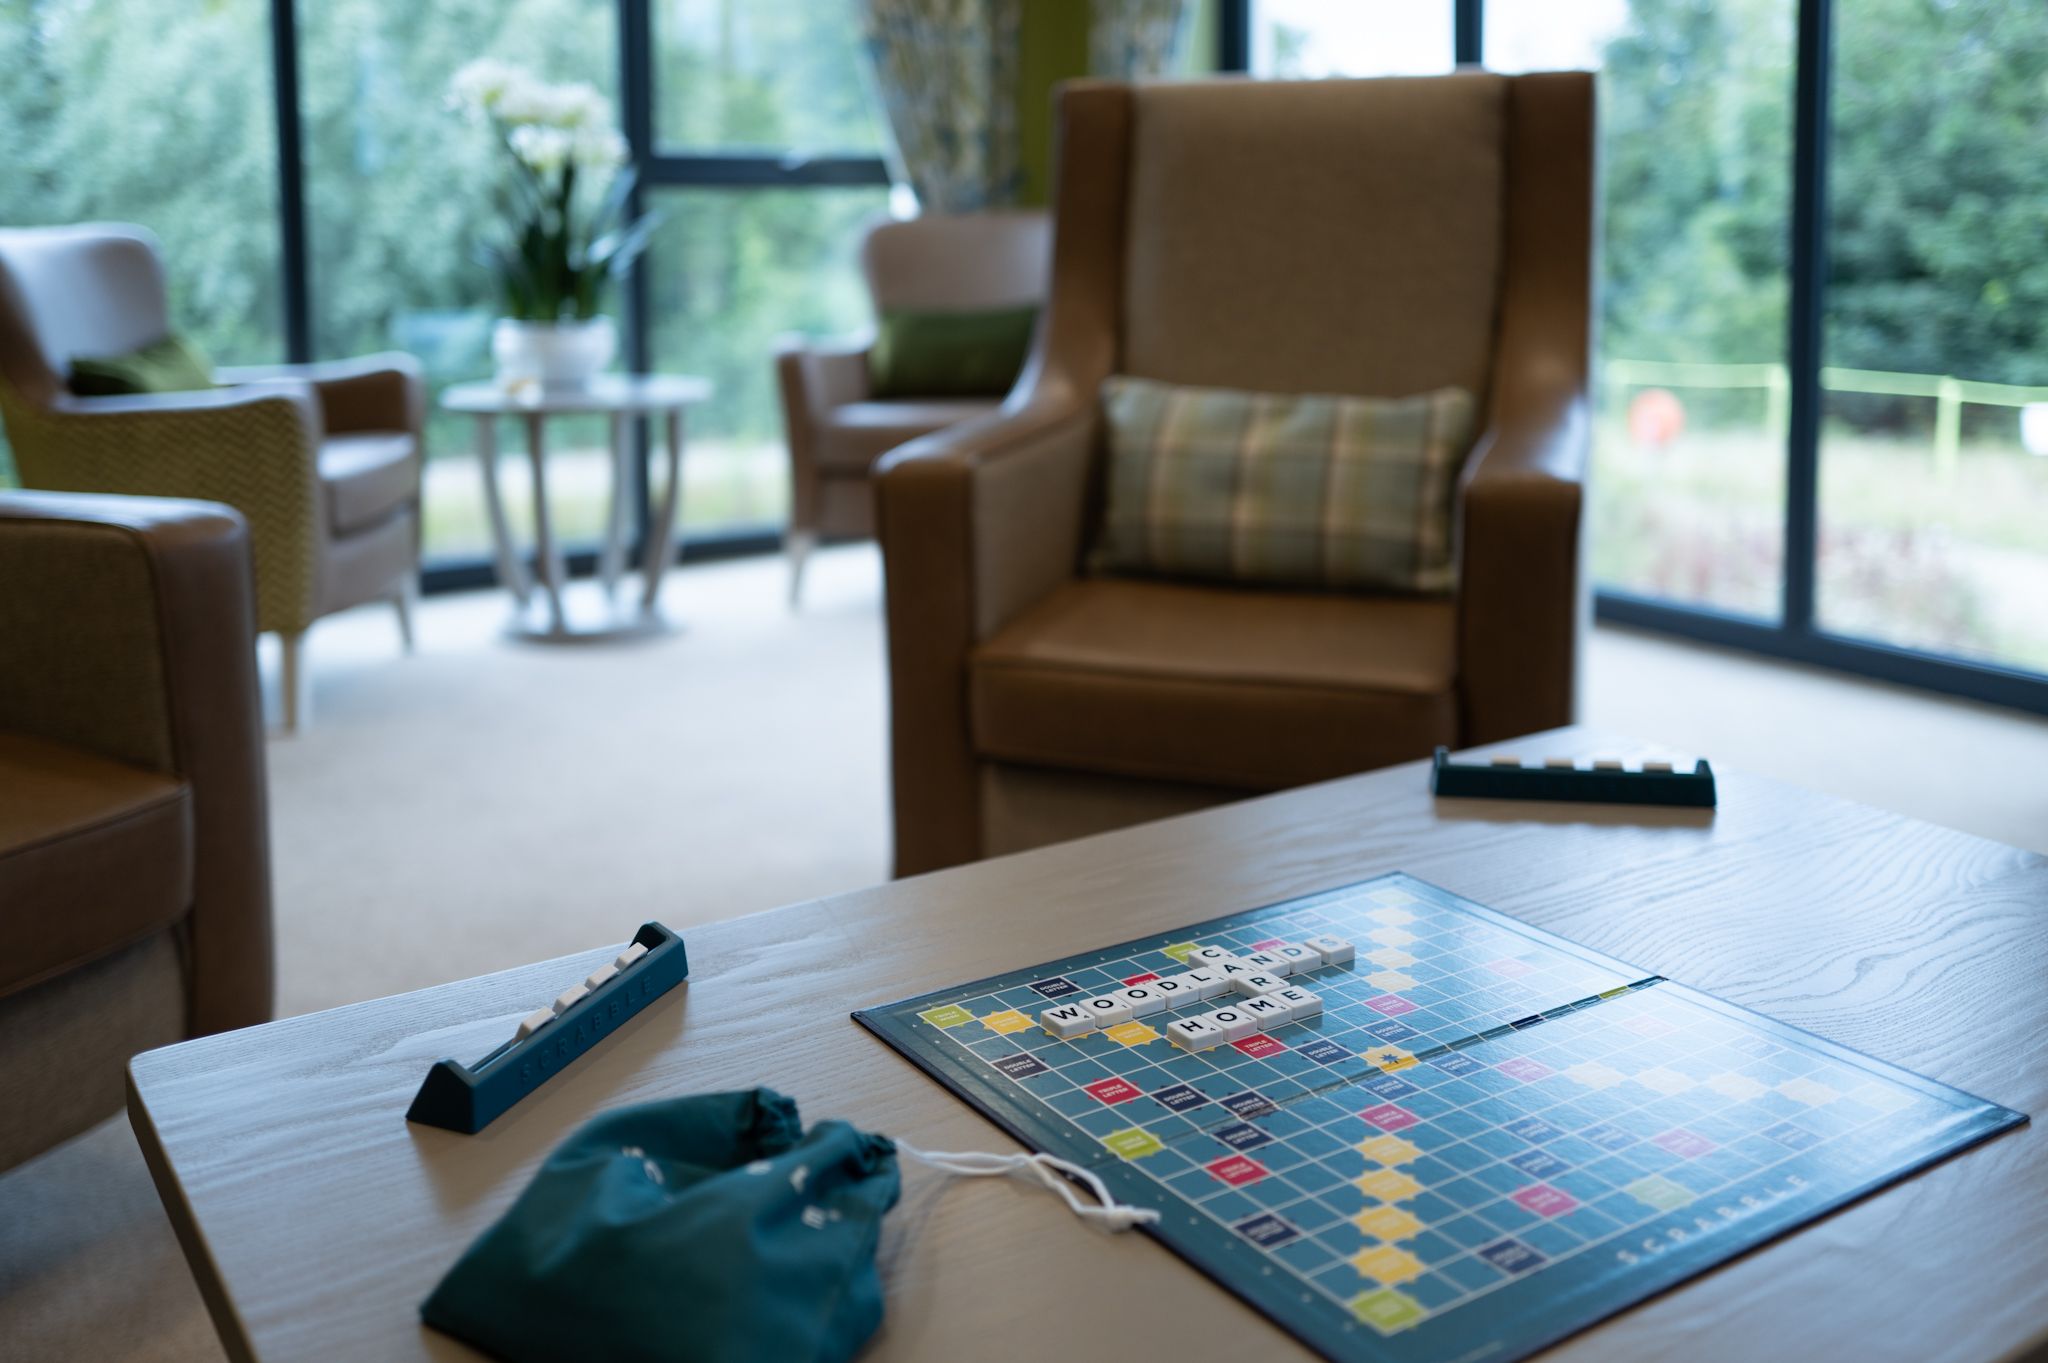 Scrabble Game in Lounge